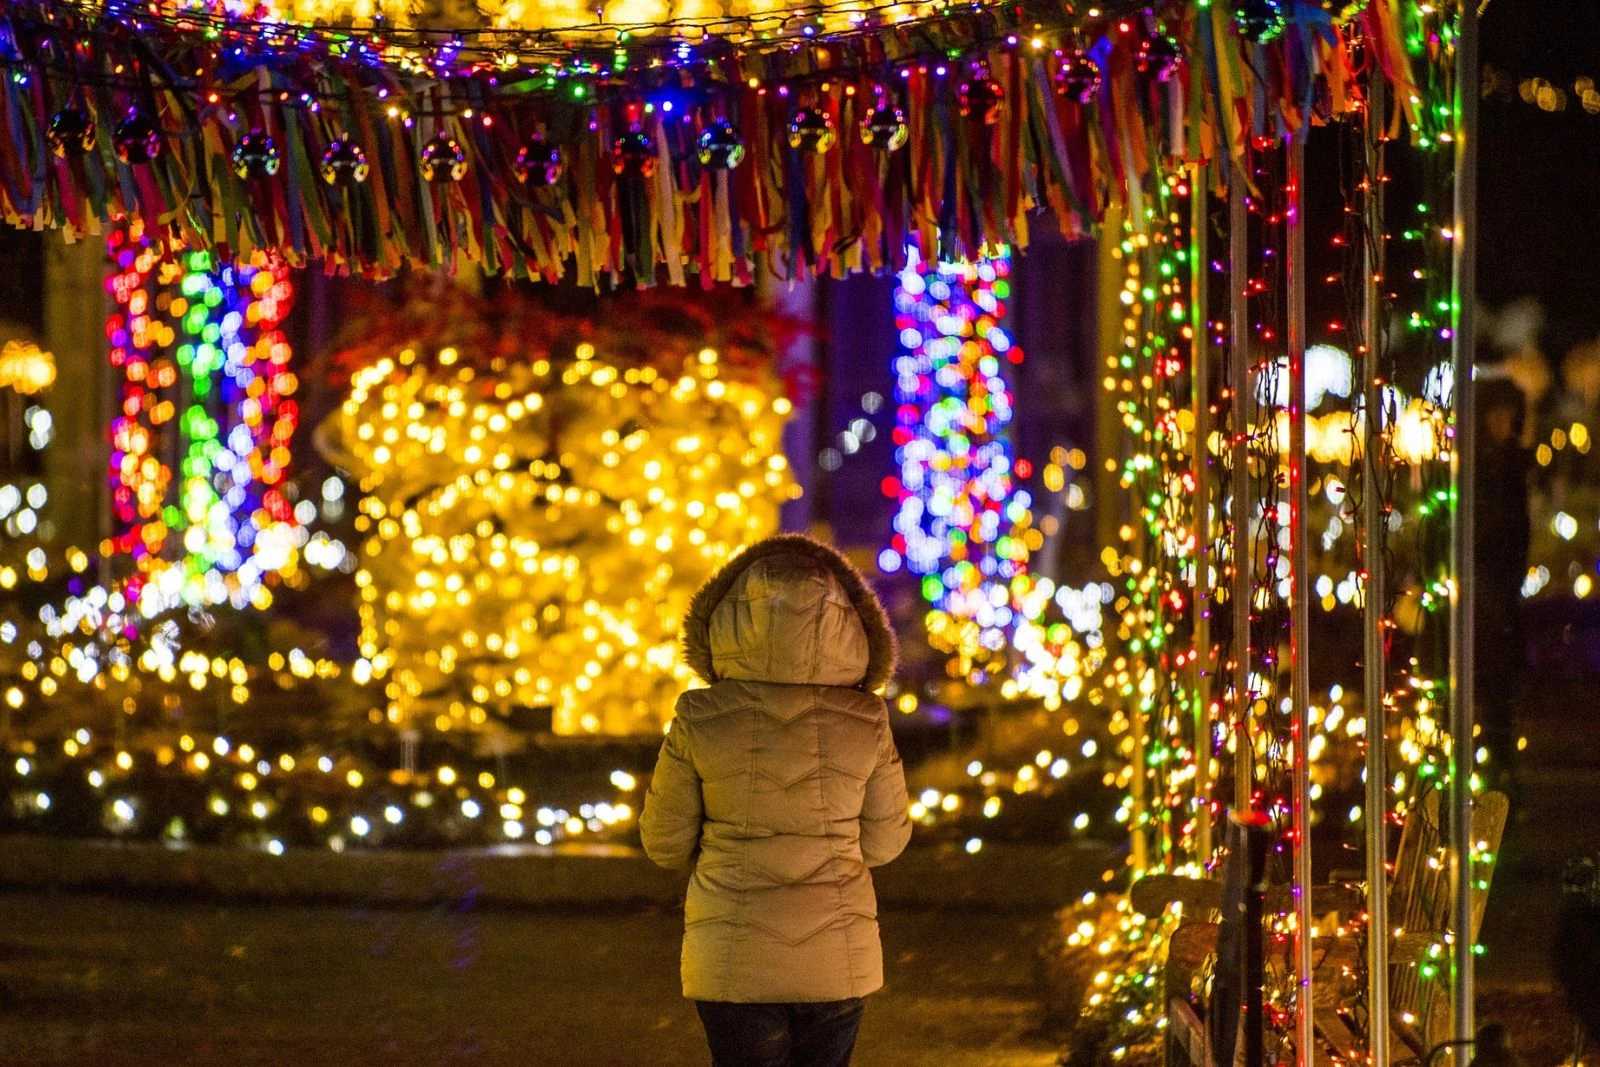 Night Lights' Brings the Magic of the Holidays to Life in Boston